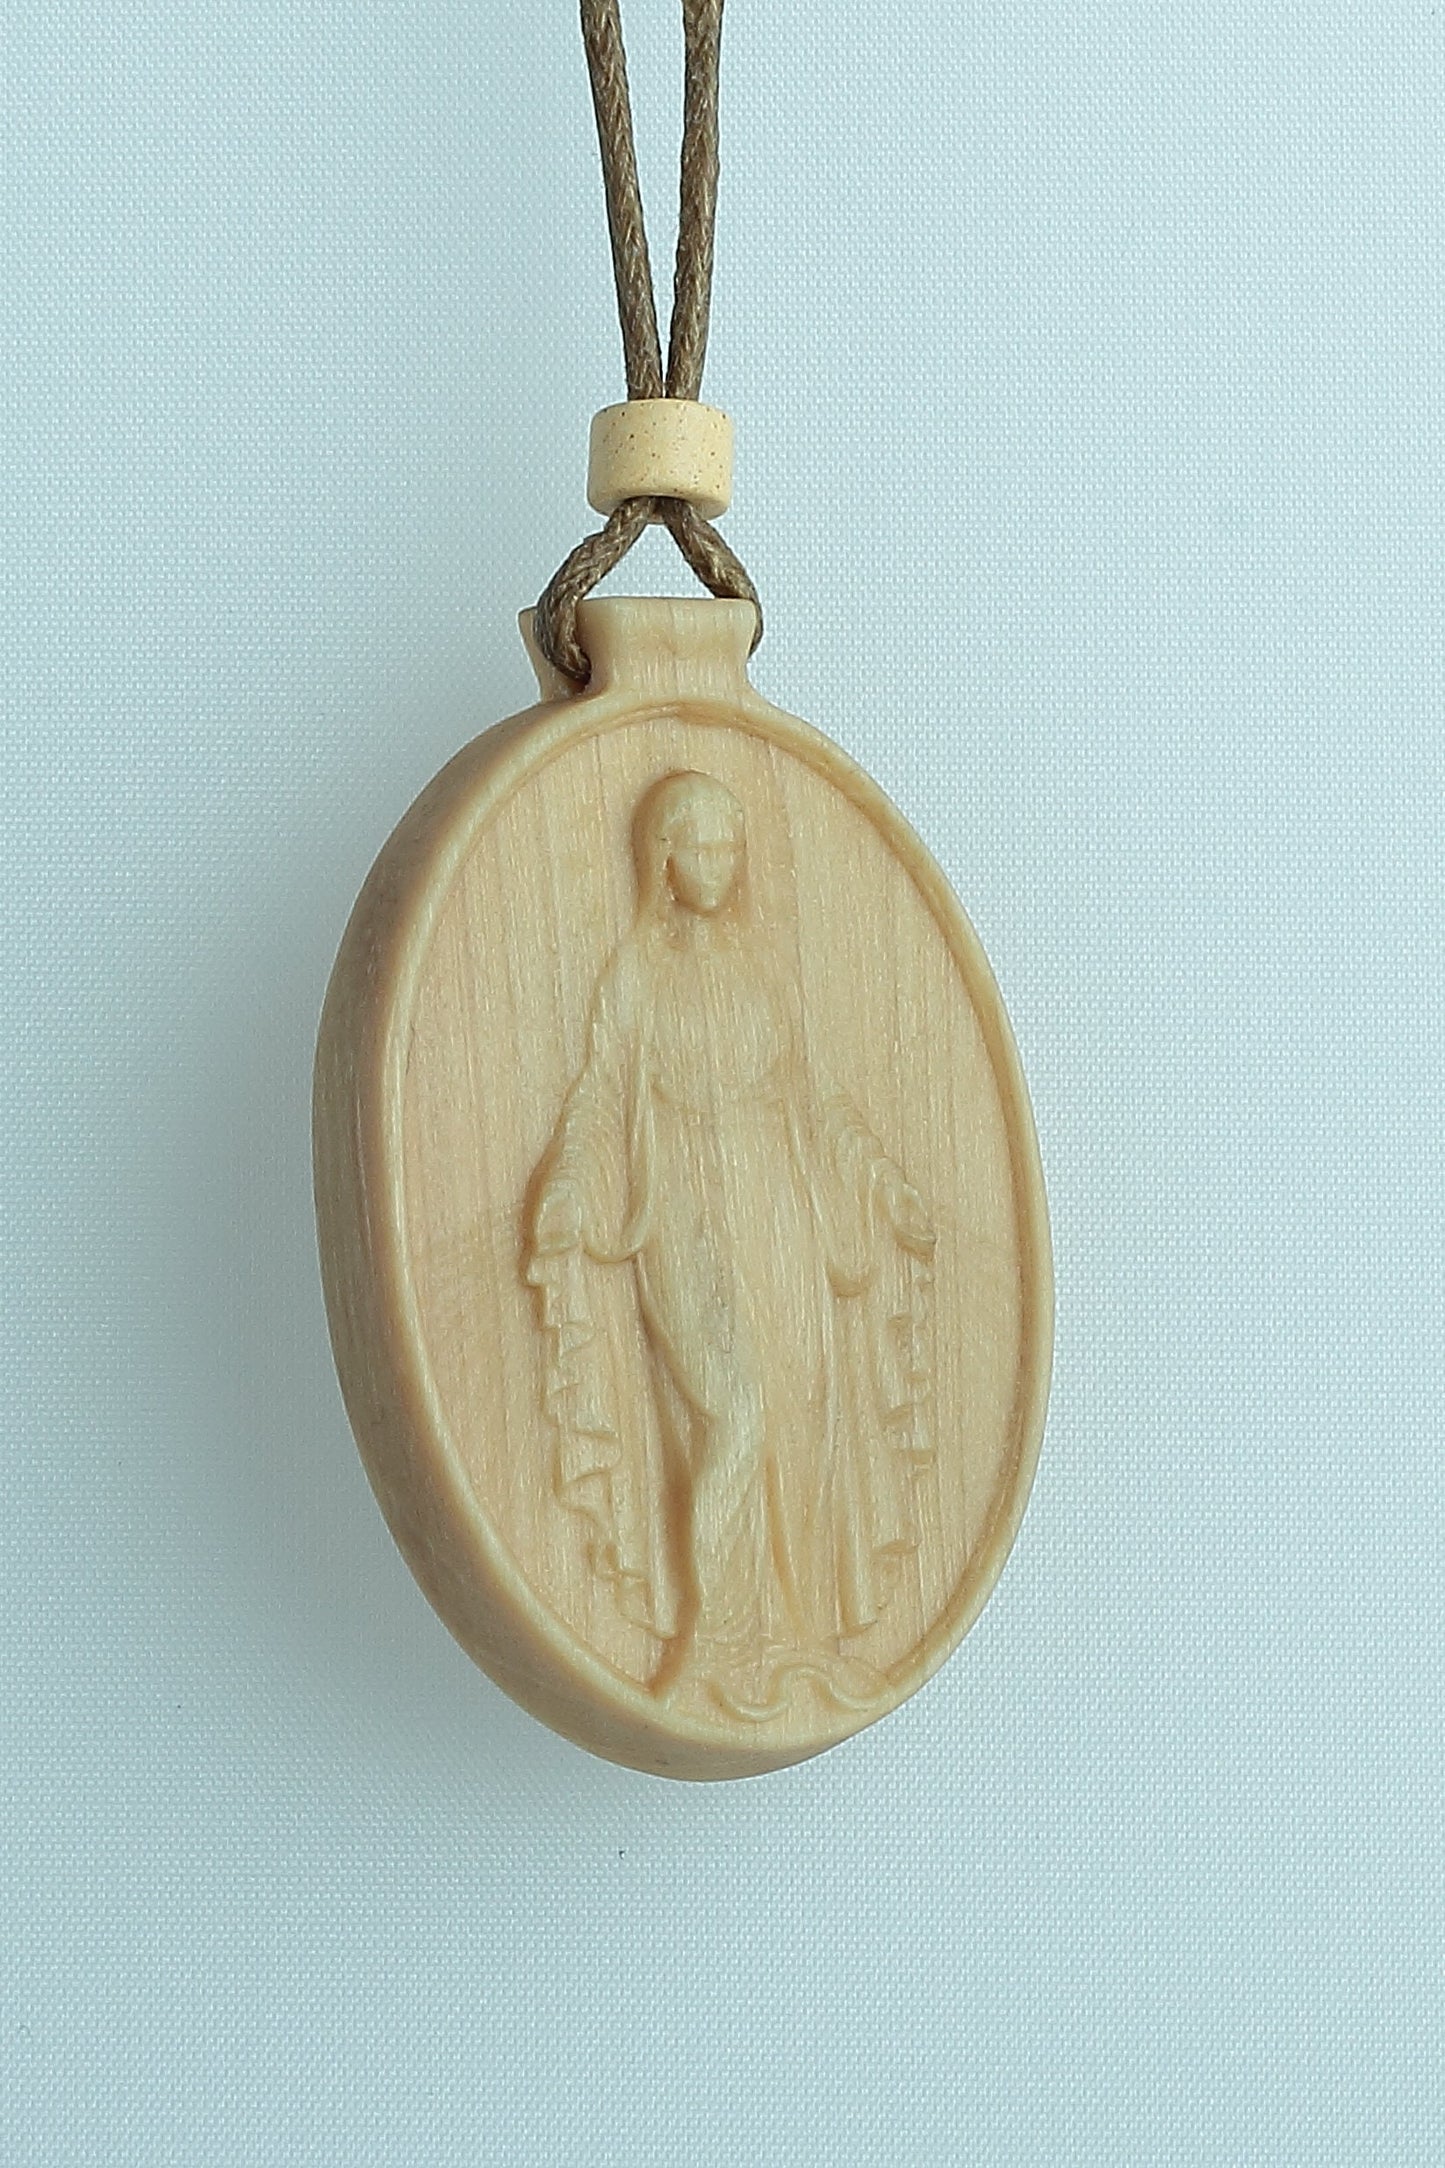 Virgin Mary necklace Virgin Mary pendant St Mary necklace wood necklace